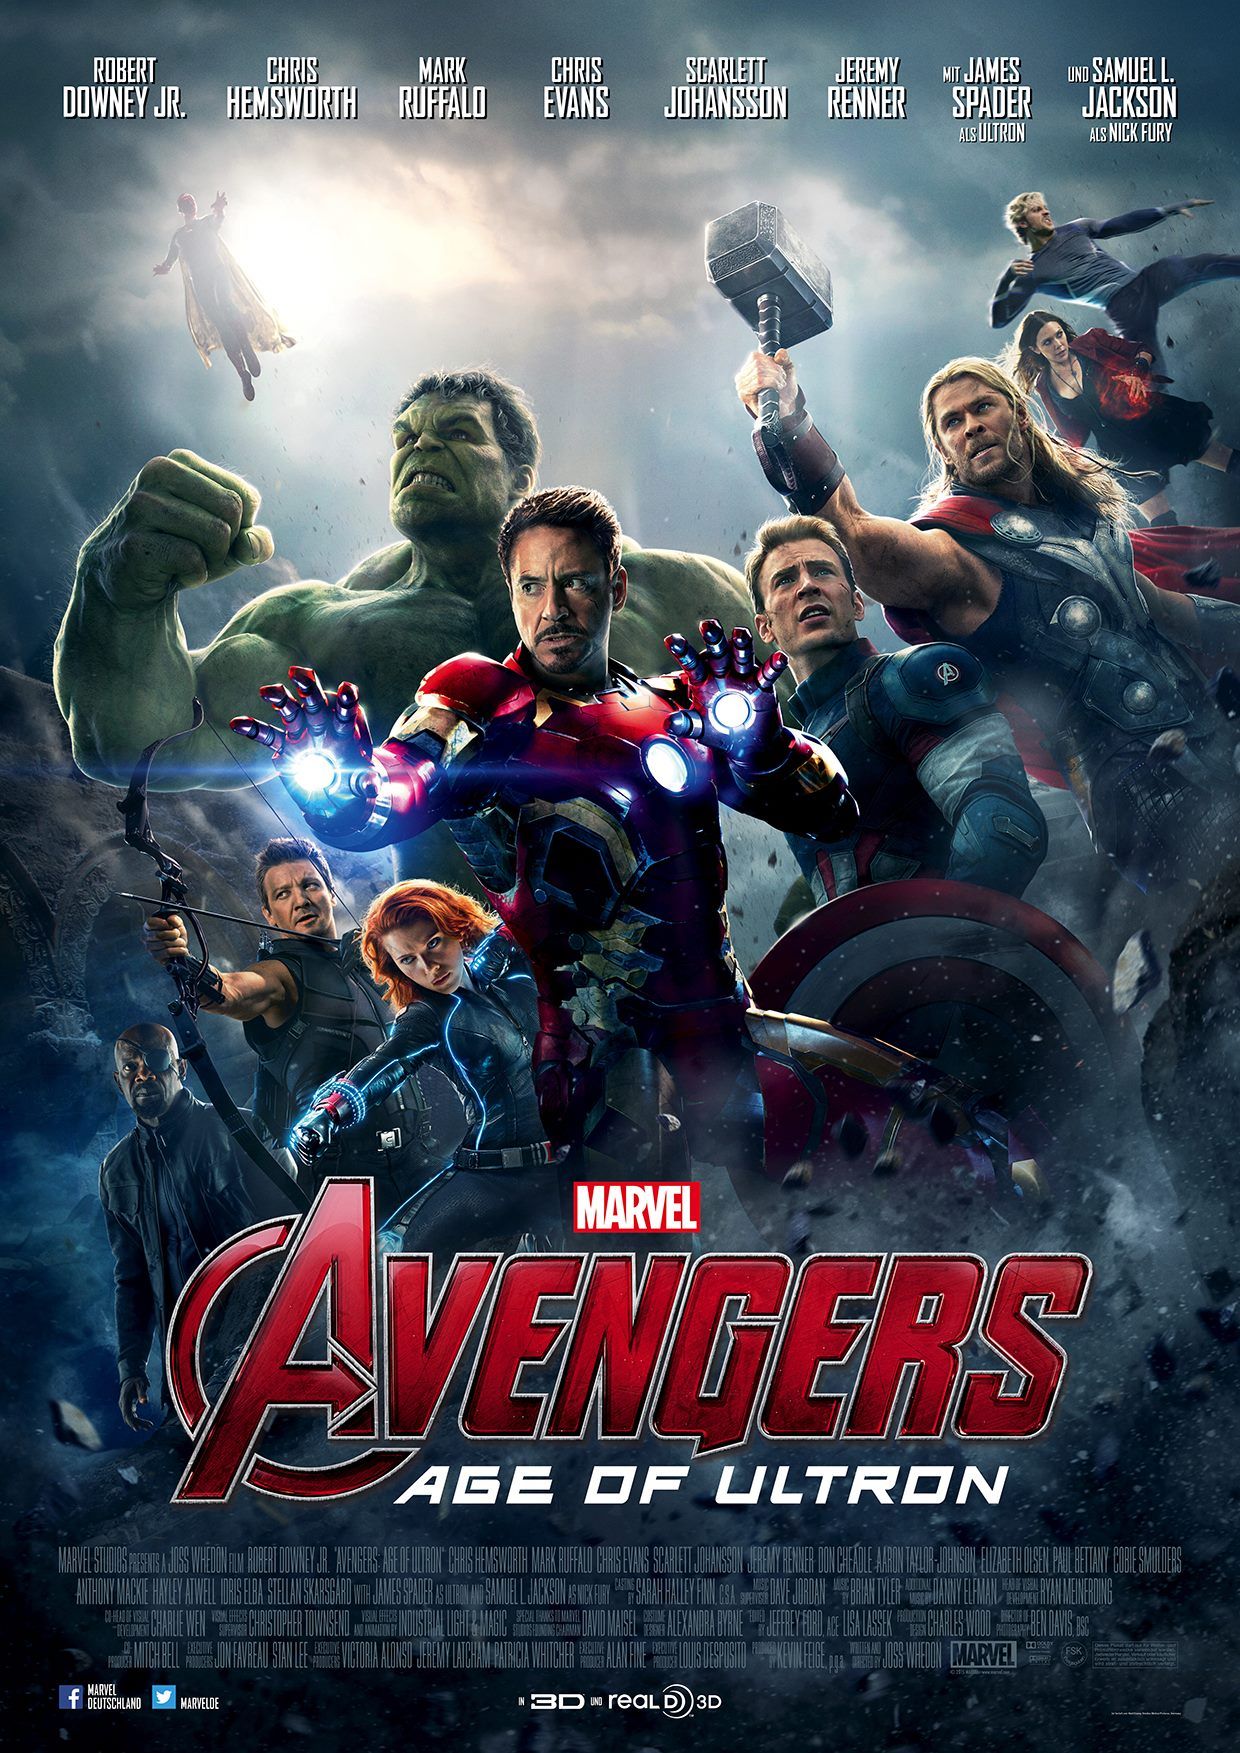 The Final 'Avengers: Age of Ultron' Trailer Has Arrived